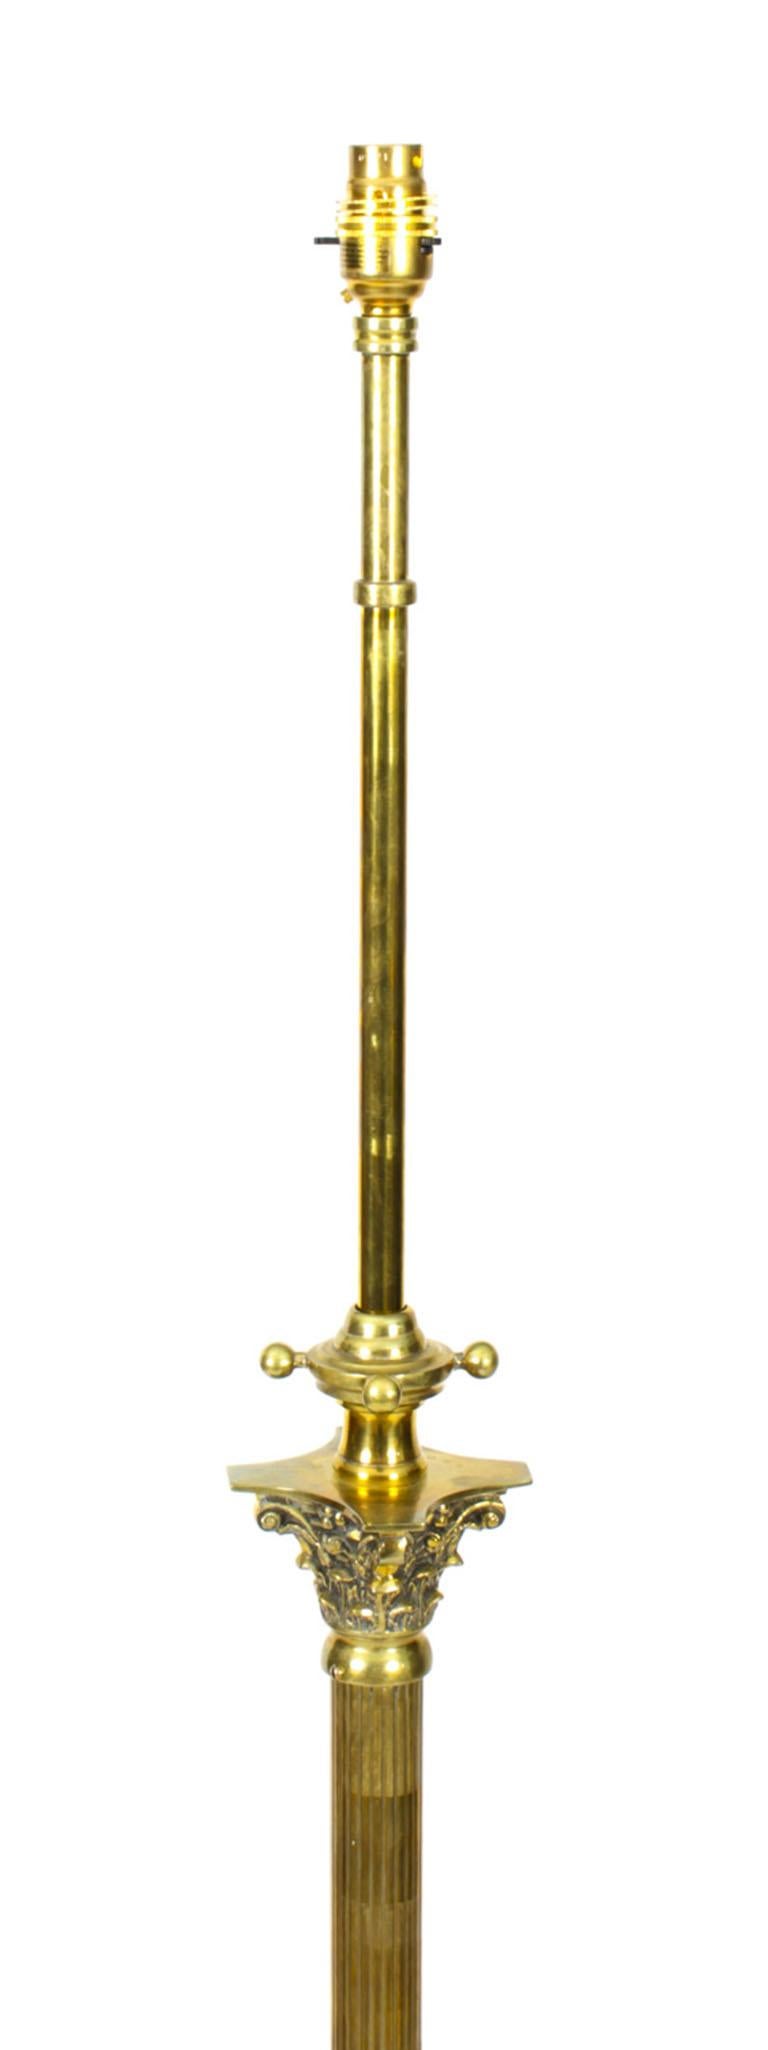 This is a highly attractive and exhibition quality antique Victorian brass floor standard lamp now converted to electricity, circa 1890 in date.

This splendid lamp features a distinguished cylindrical reeded column rising from a beautiful fluted